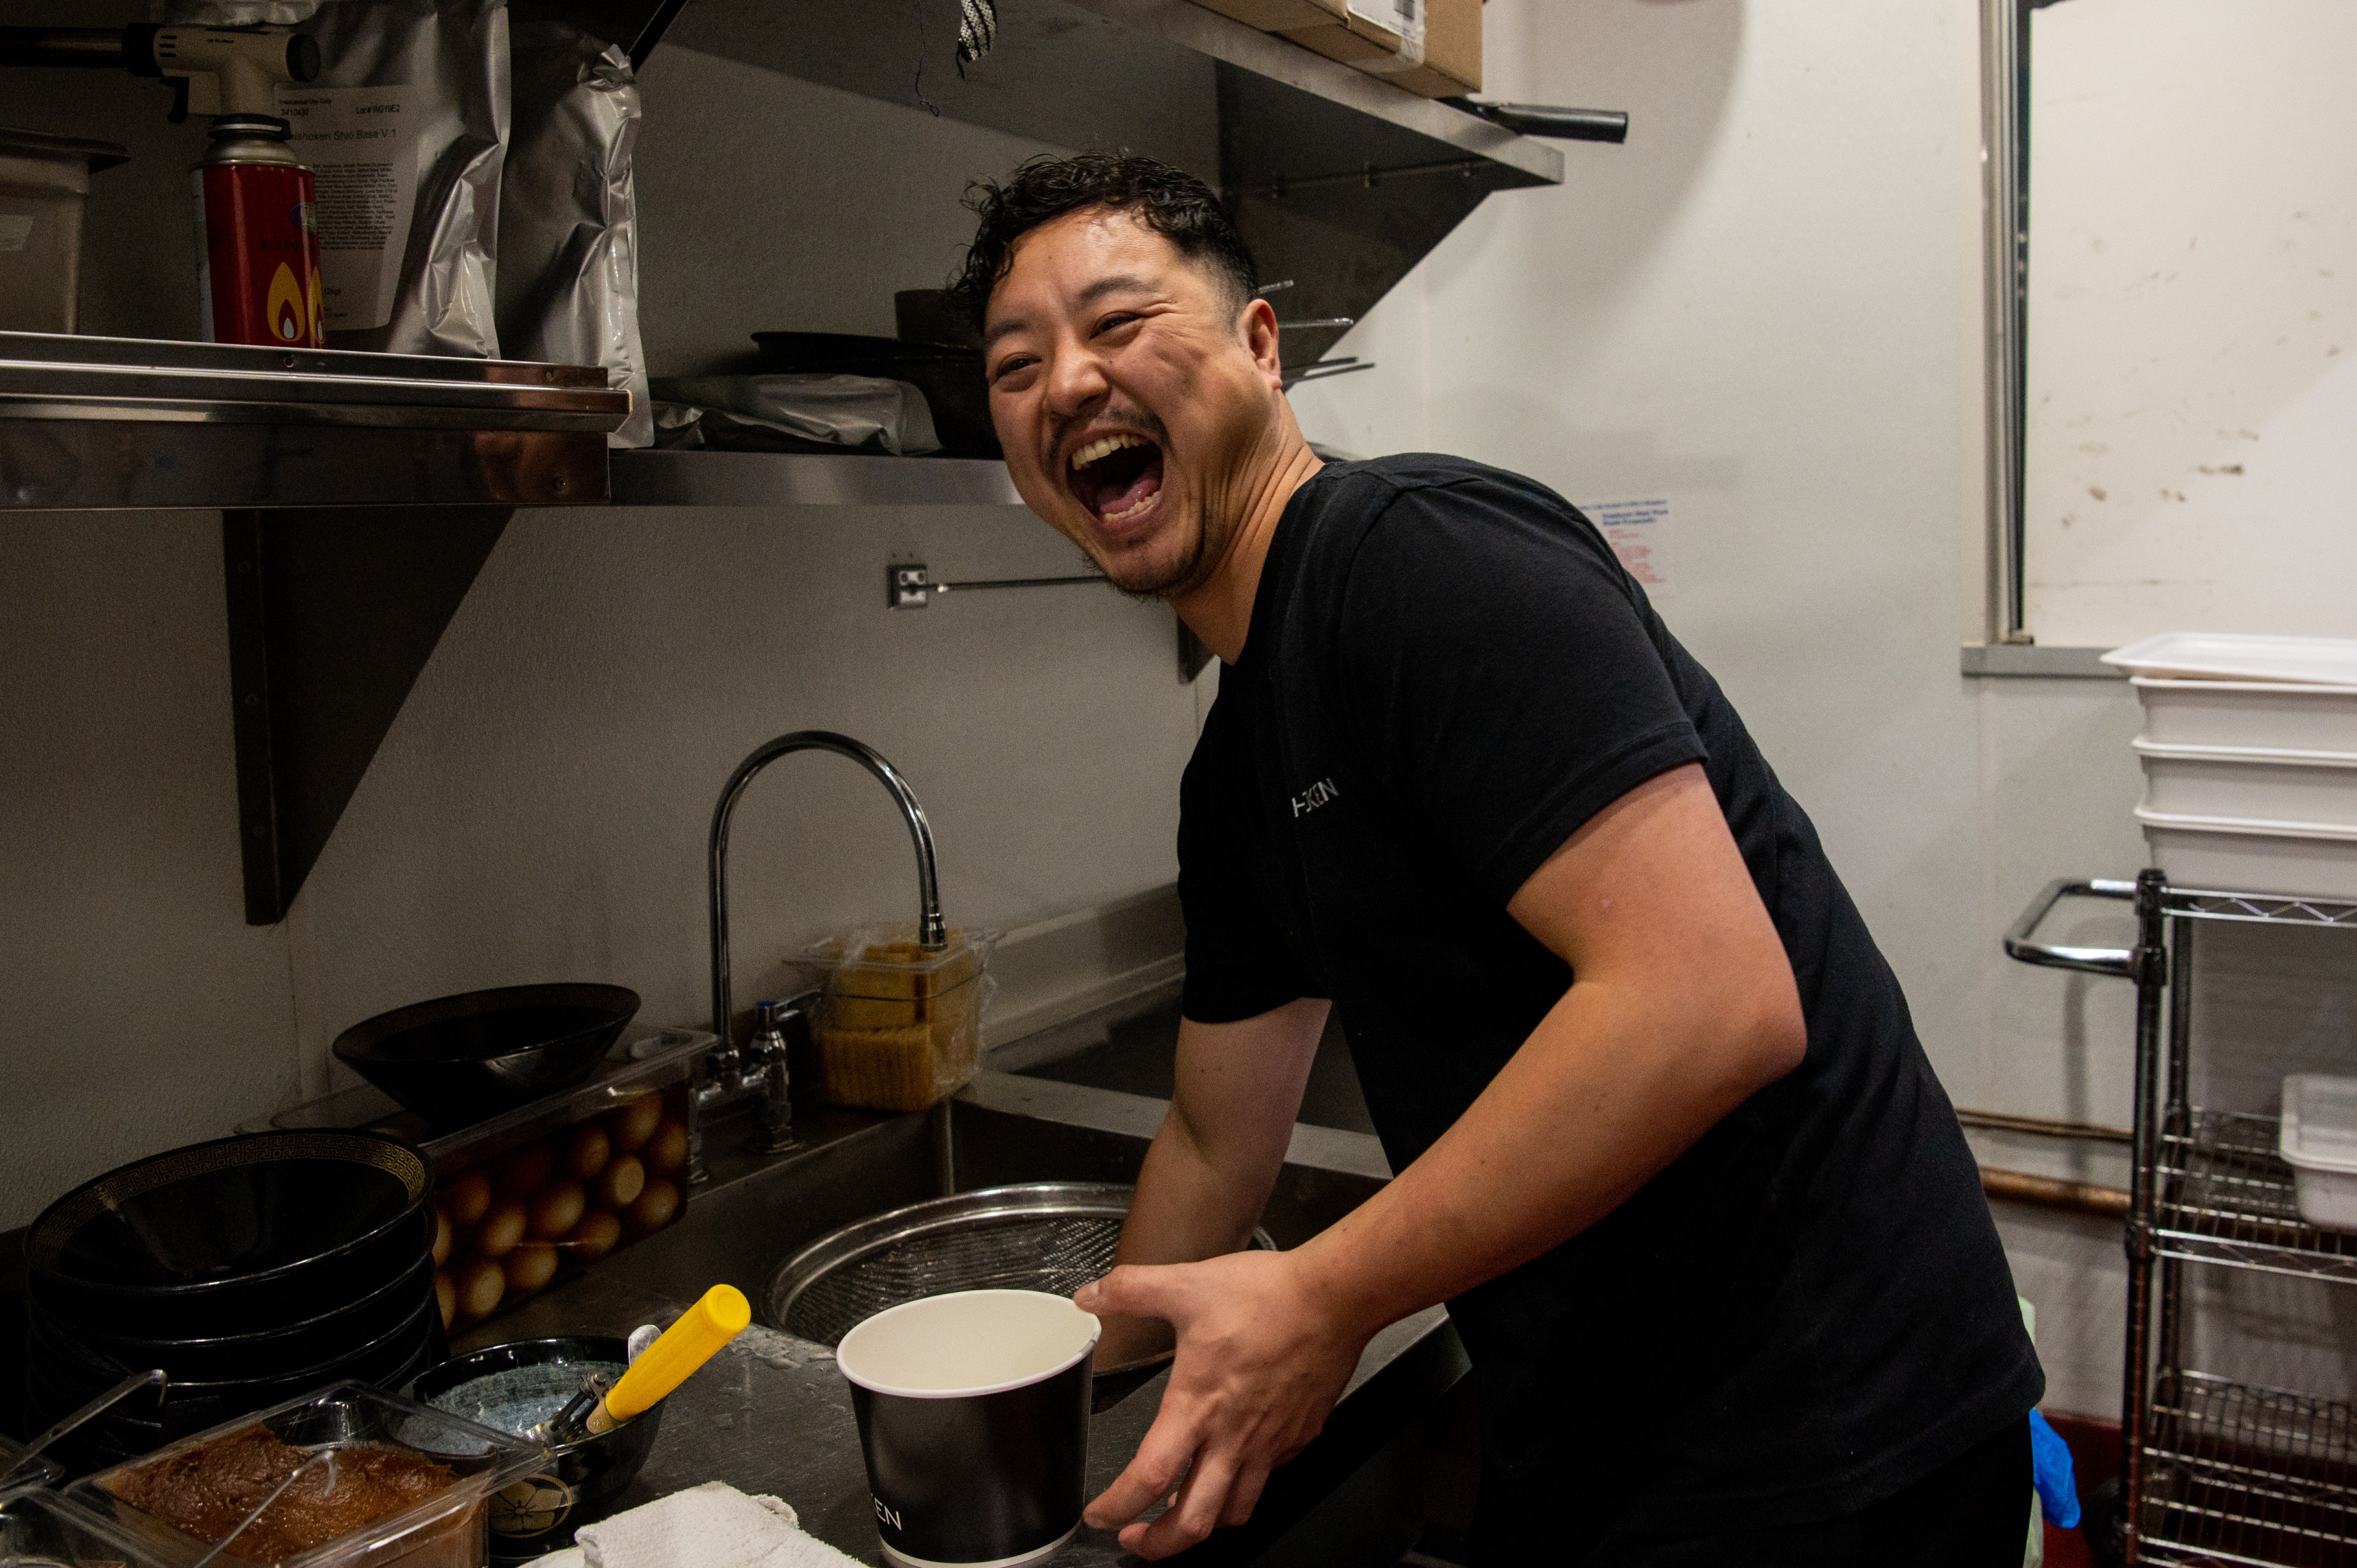 A laughing man stands over a sink in a restaurant kitchen.